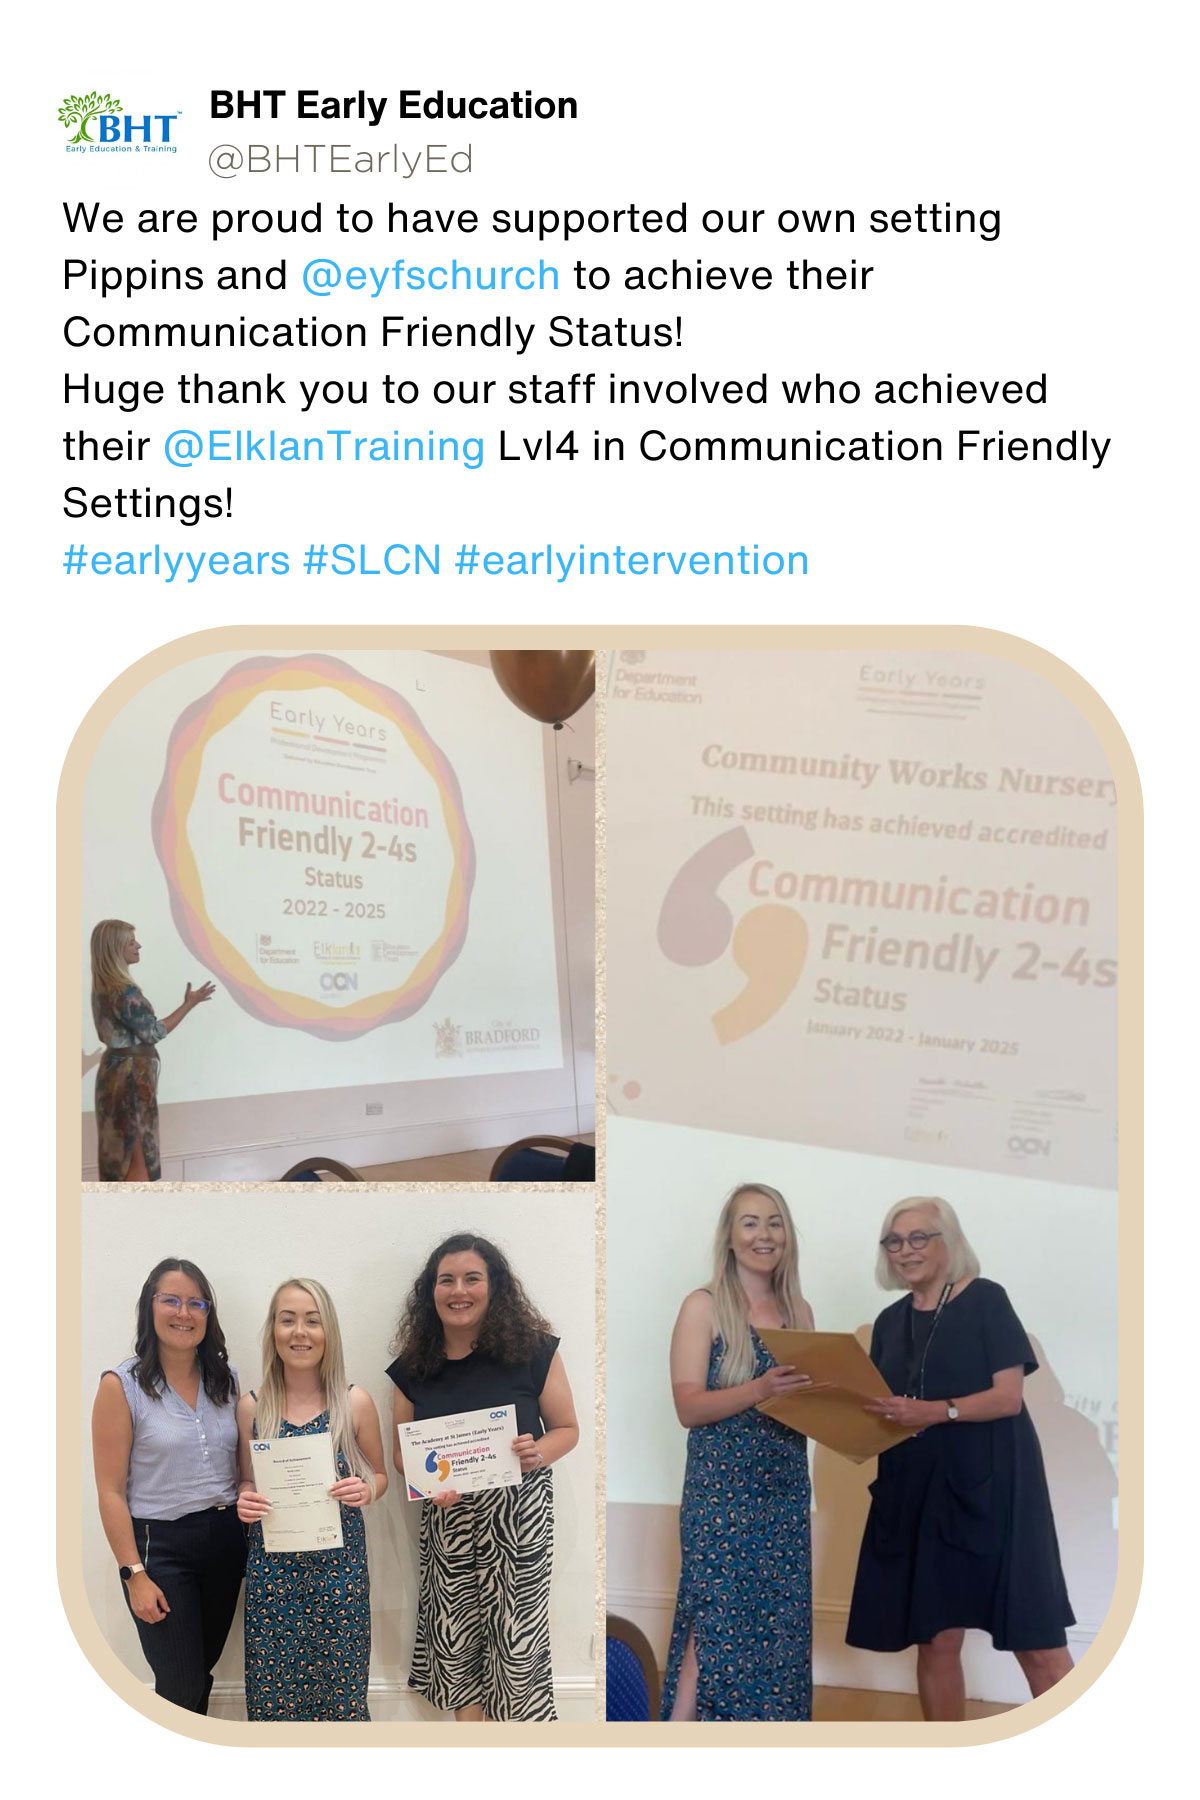 BHT Early Education: We are proud to have supported our own setting Pippins and EYFSchurch to achieve their Communication Friendly Status! Huge thank you to our staff involved who achieved their Elklan Training Level 4 in Communication Friendly Settings!